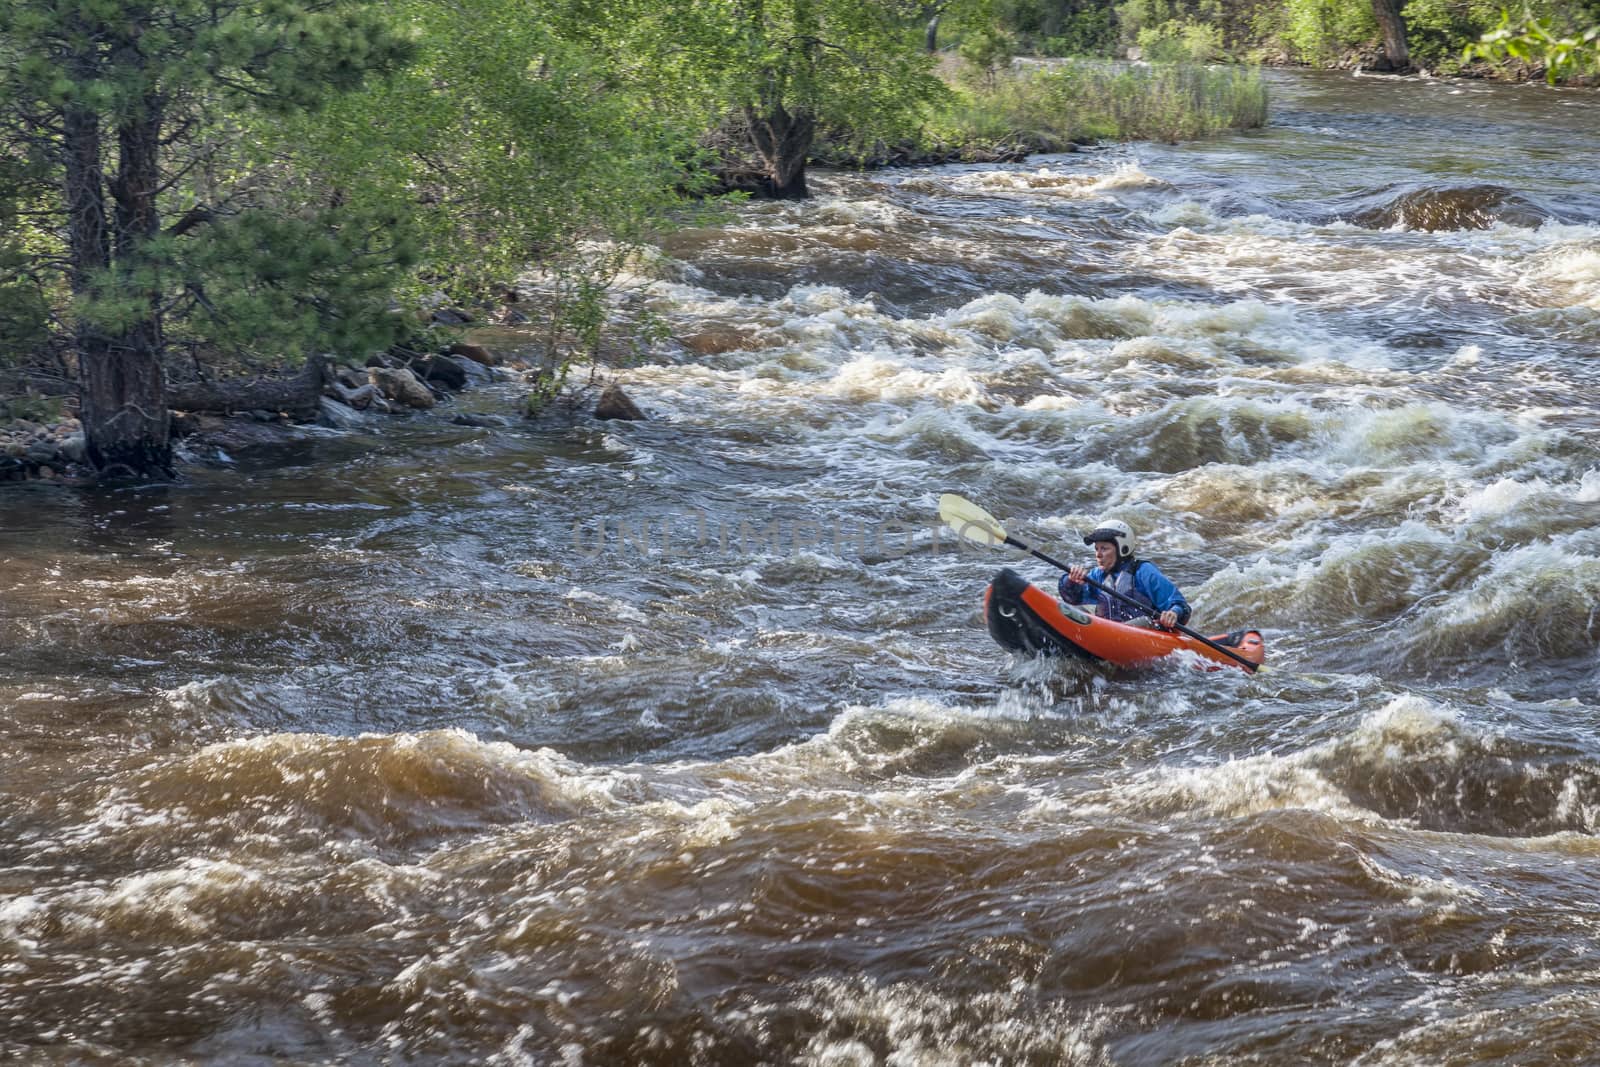 whitewater kayaker on Poudre River by PixelsAway